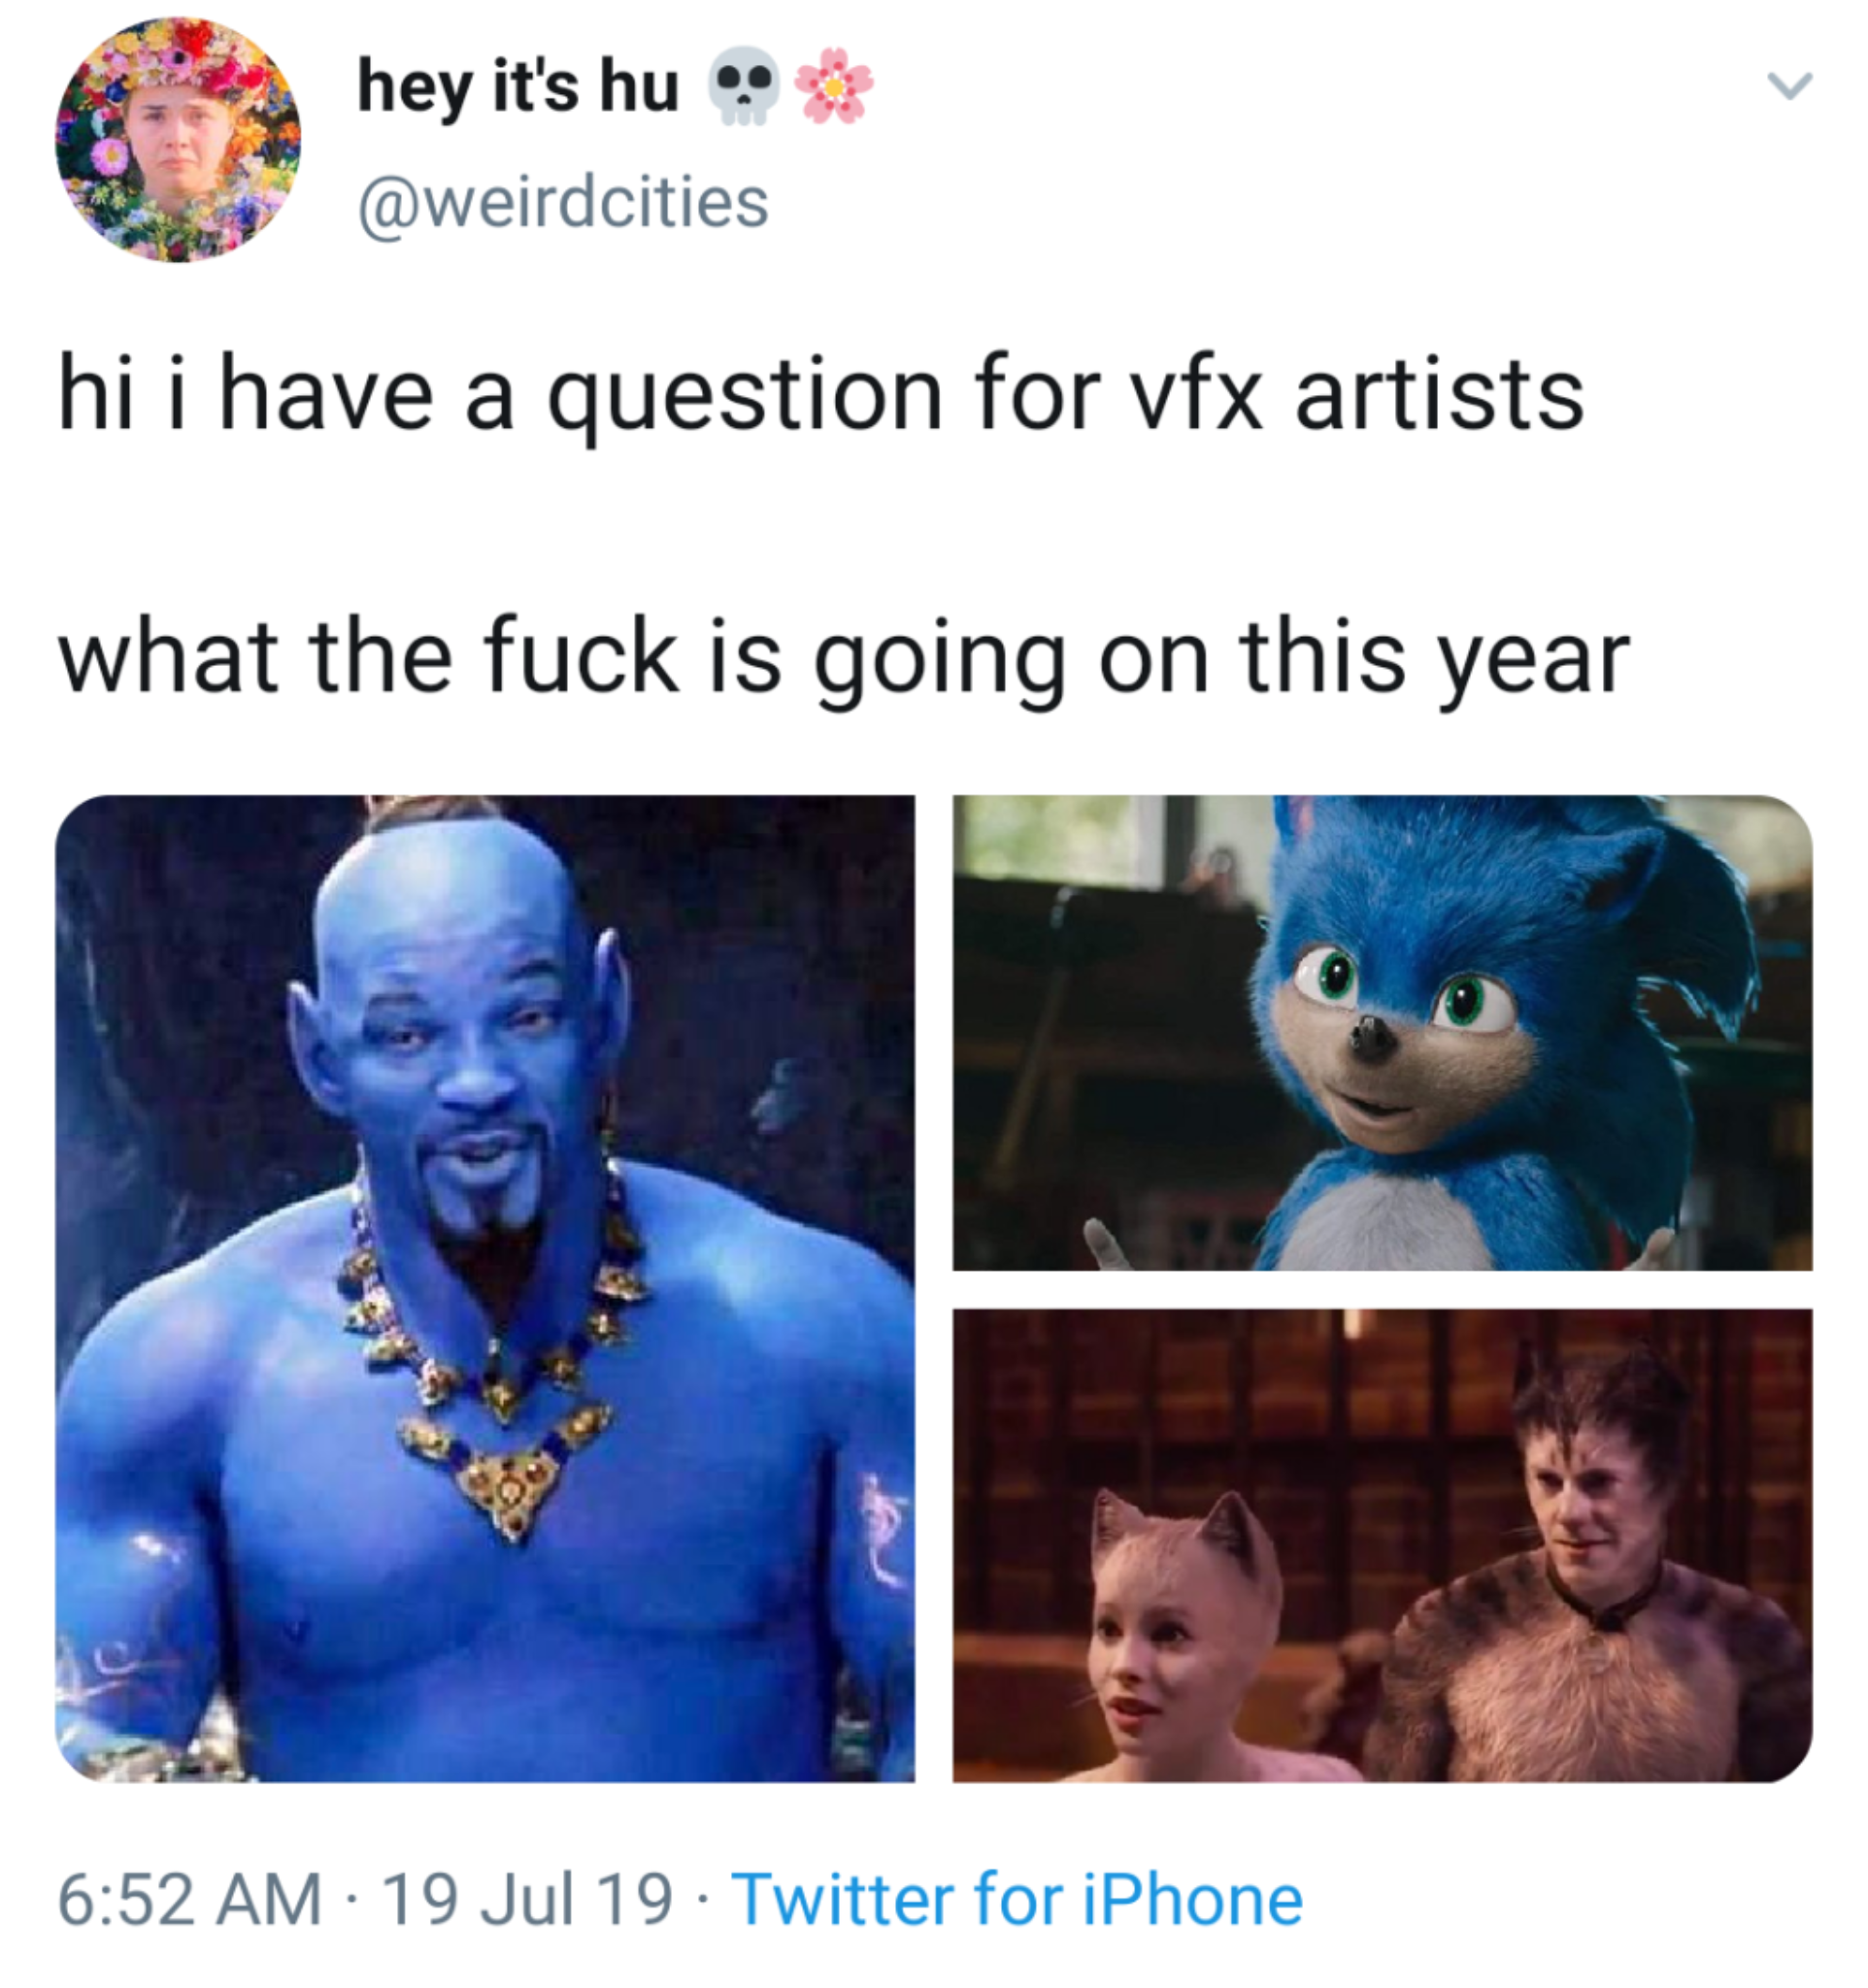 hey it's hus hi i have a question for vfx artists what the fuck is going on this year 19 Jul 19. Twitter for iPhone